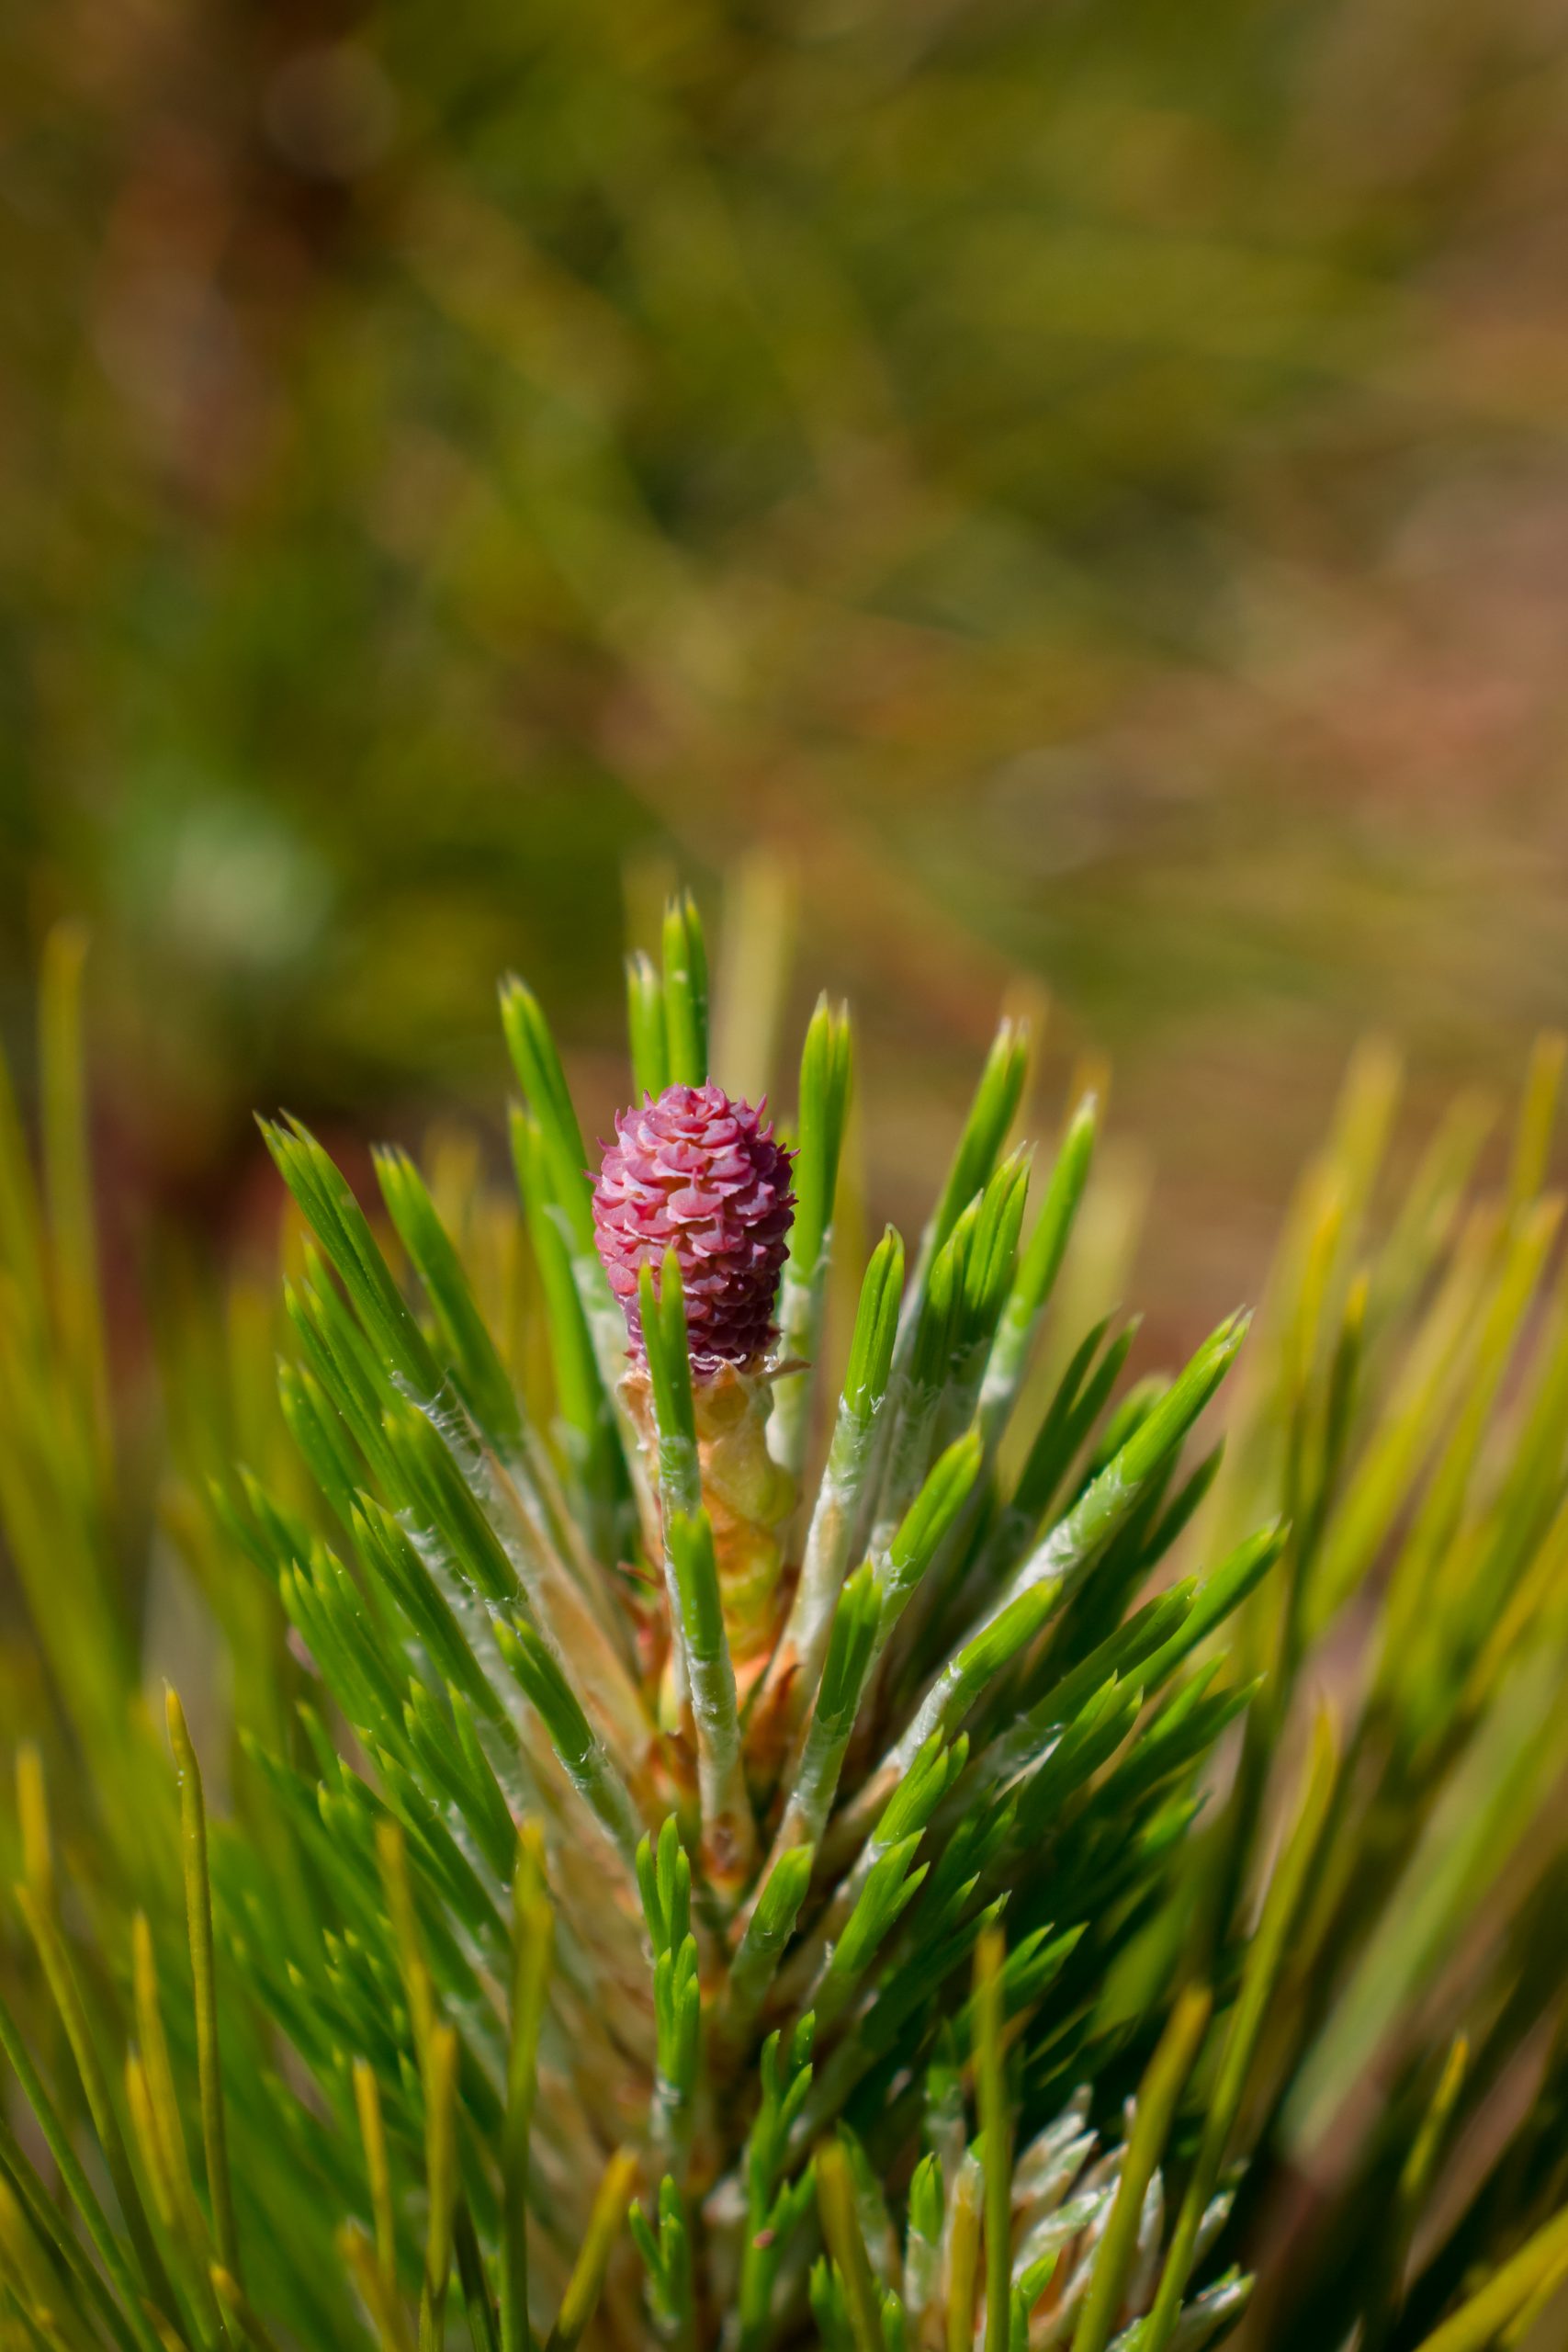 Pine cone on the plant